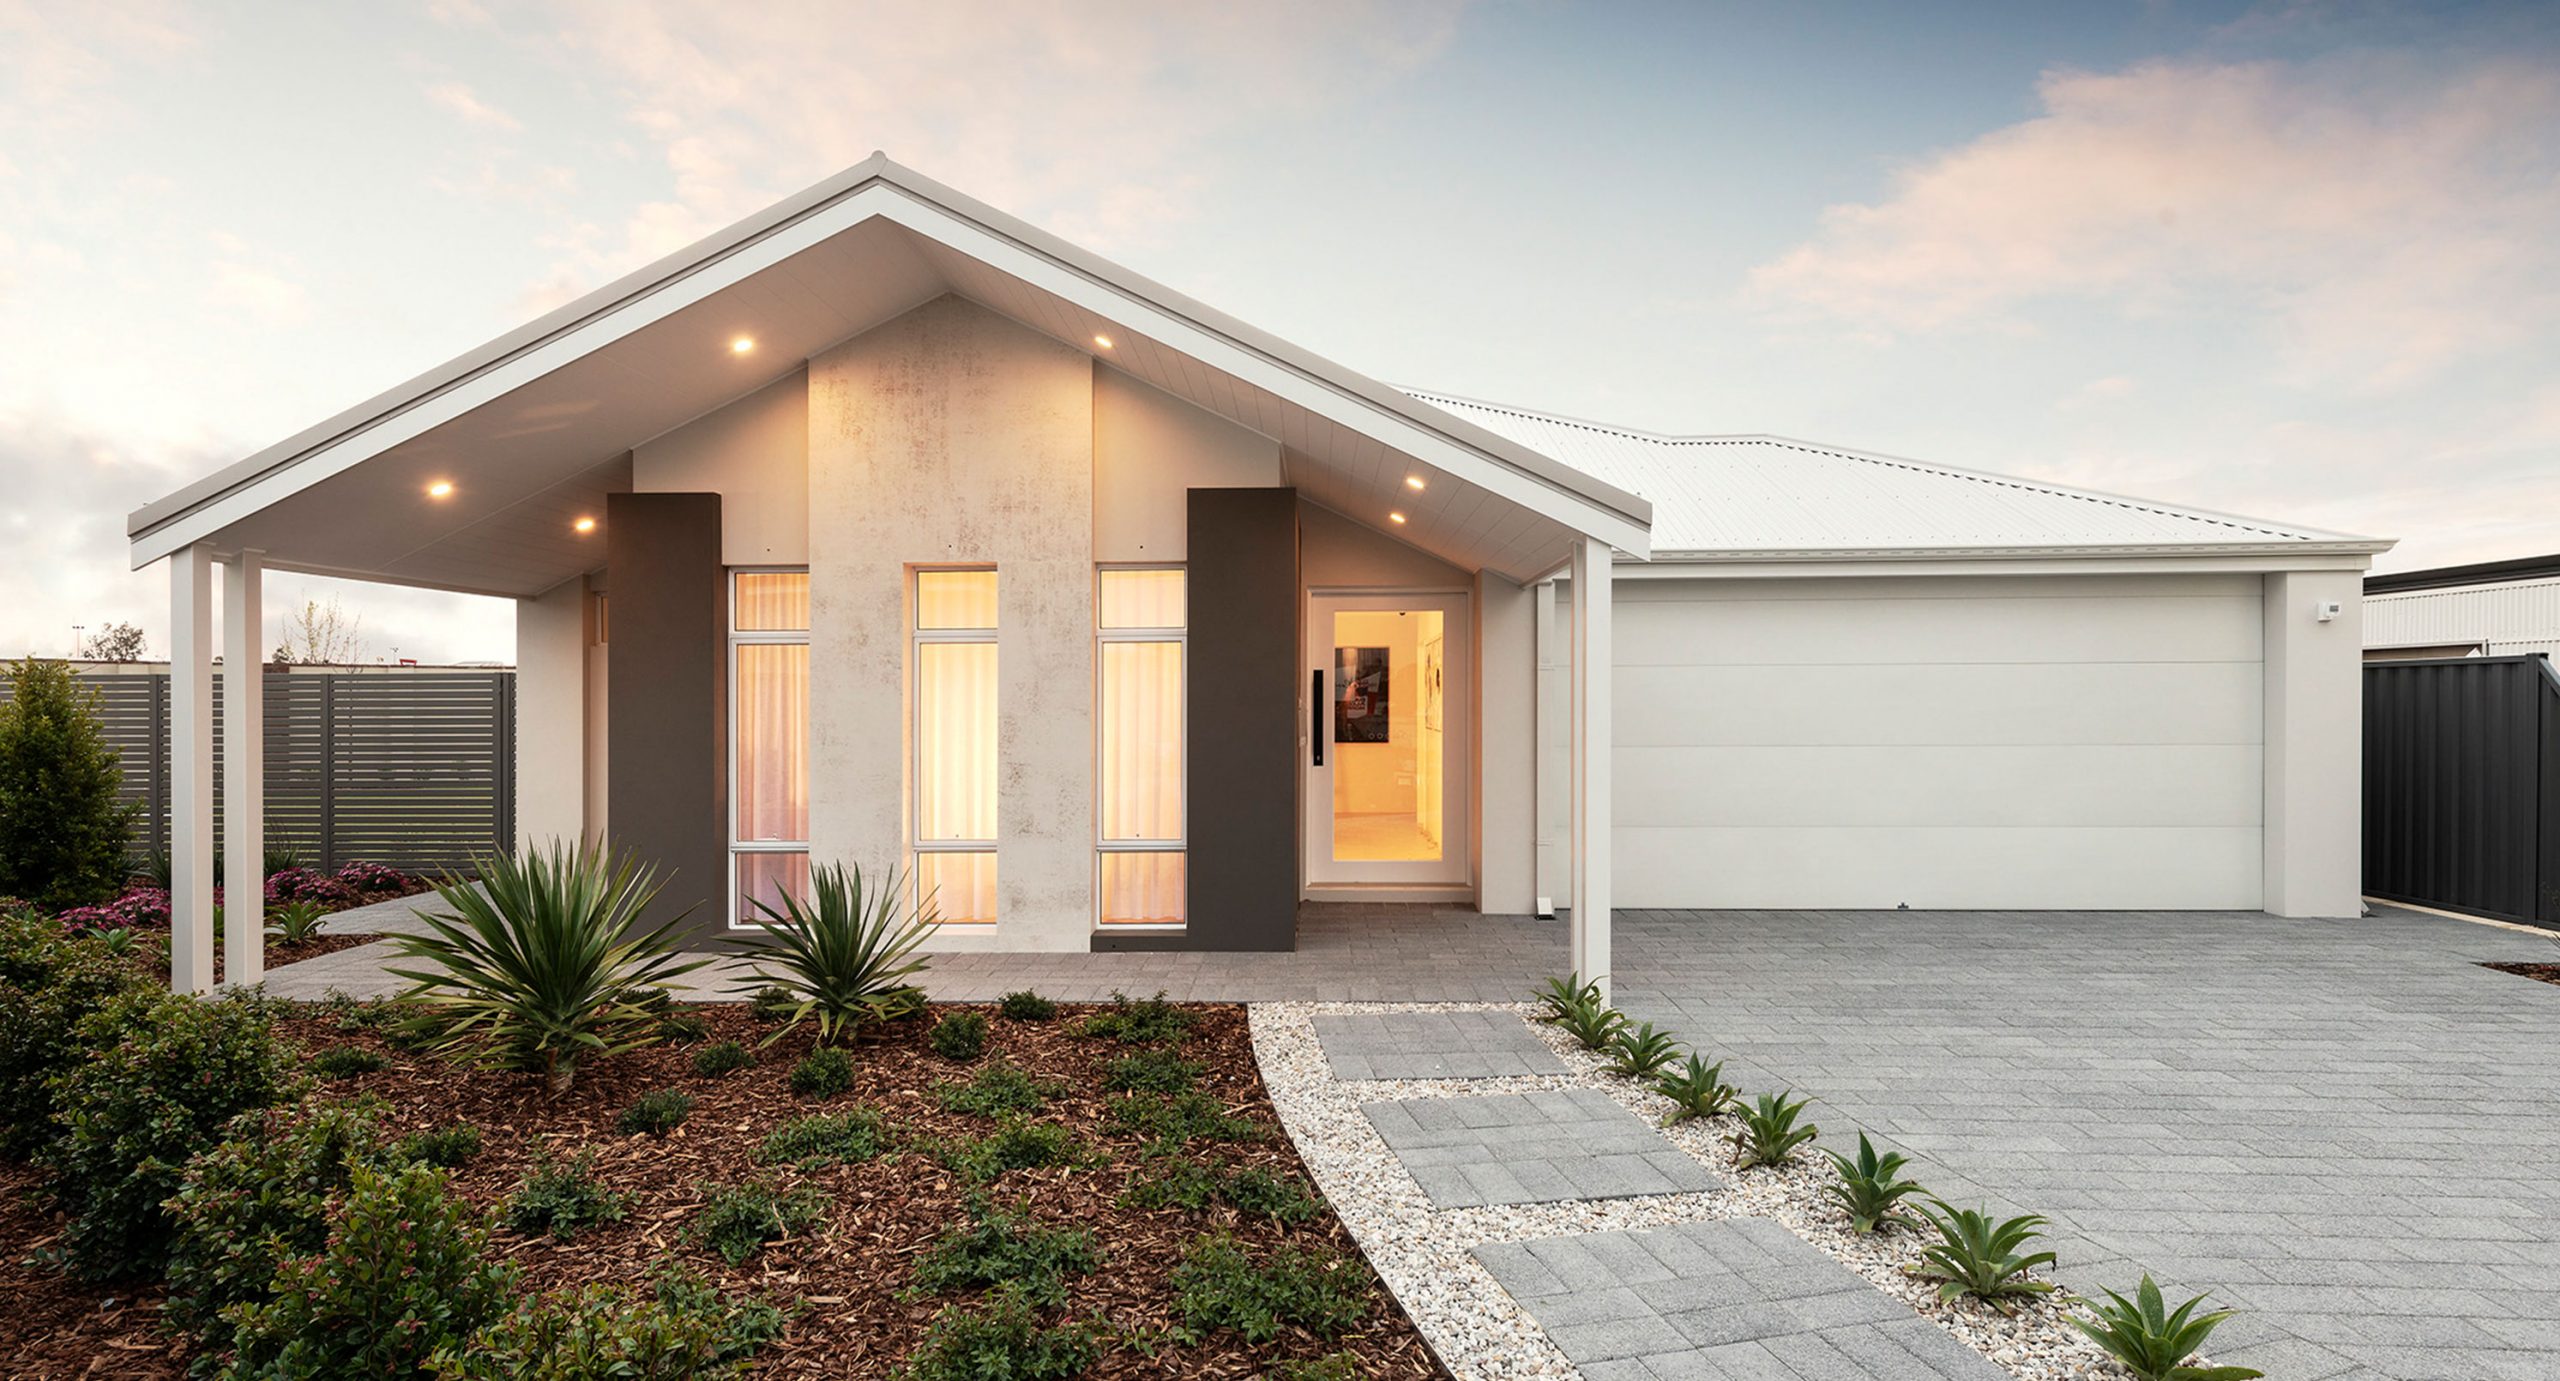 Display home with white sectional garage door